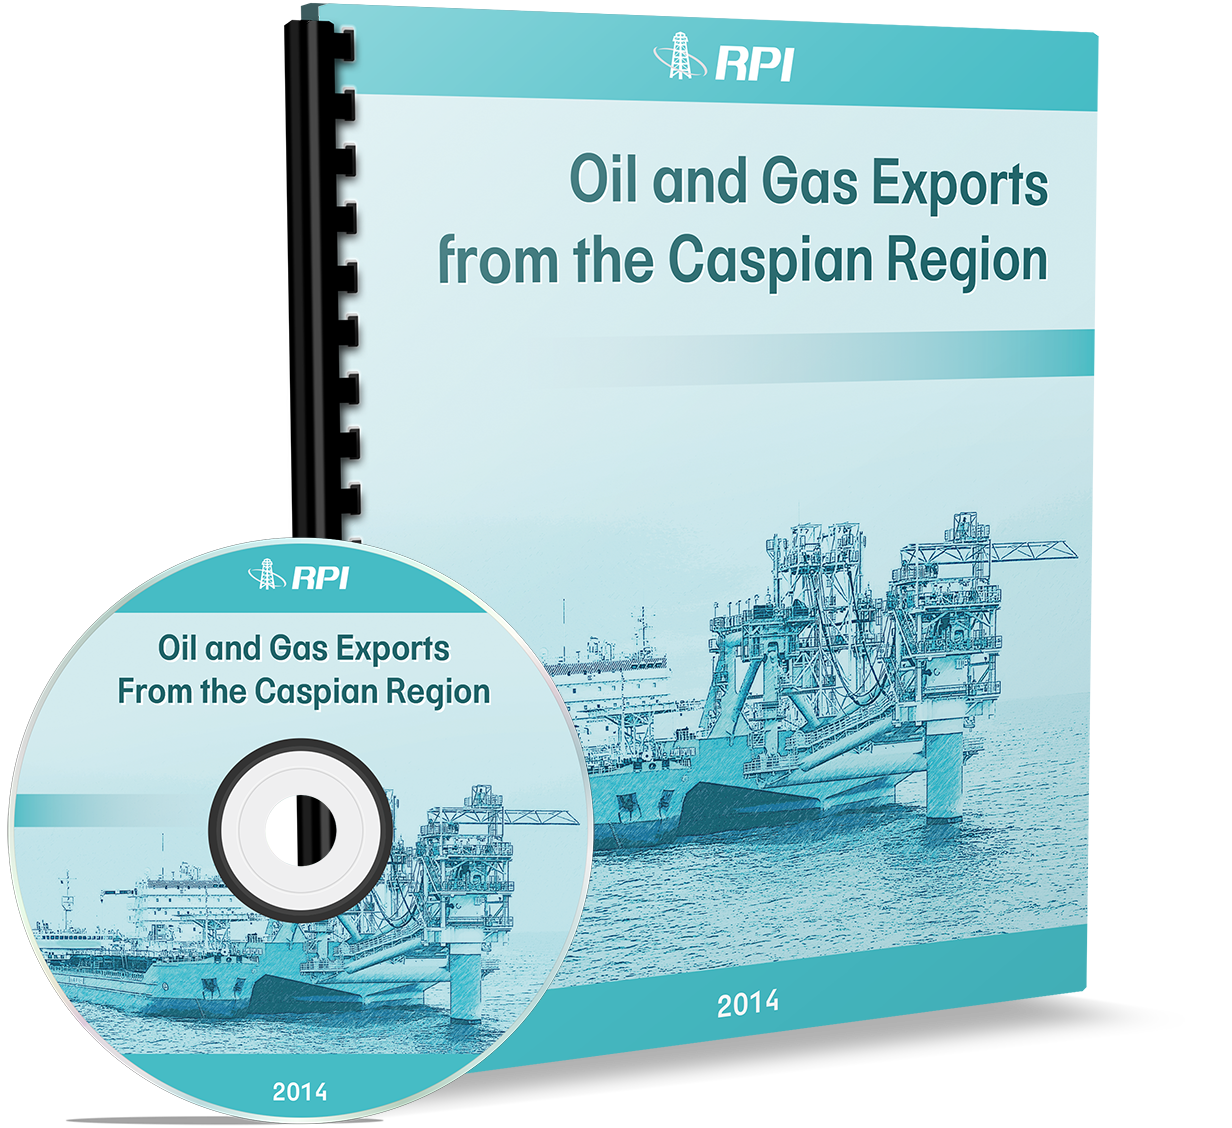 Oil and Gas Exports from the Caspian Region 2014